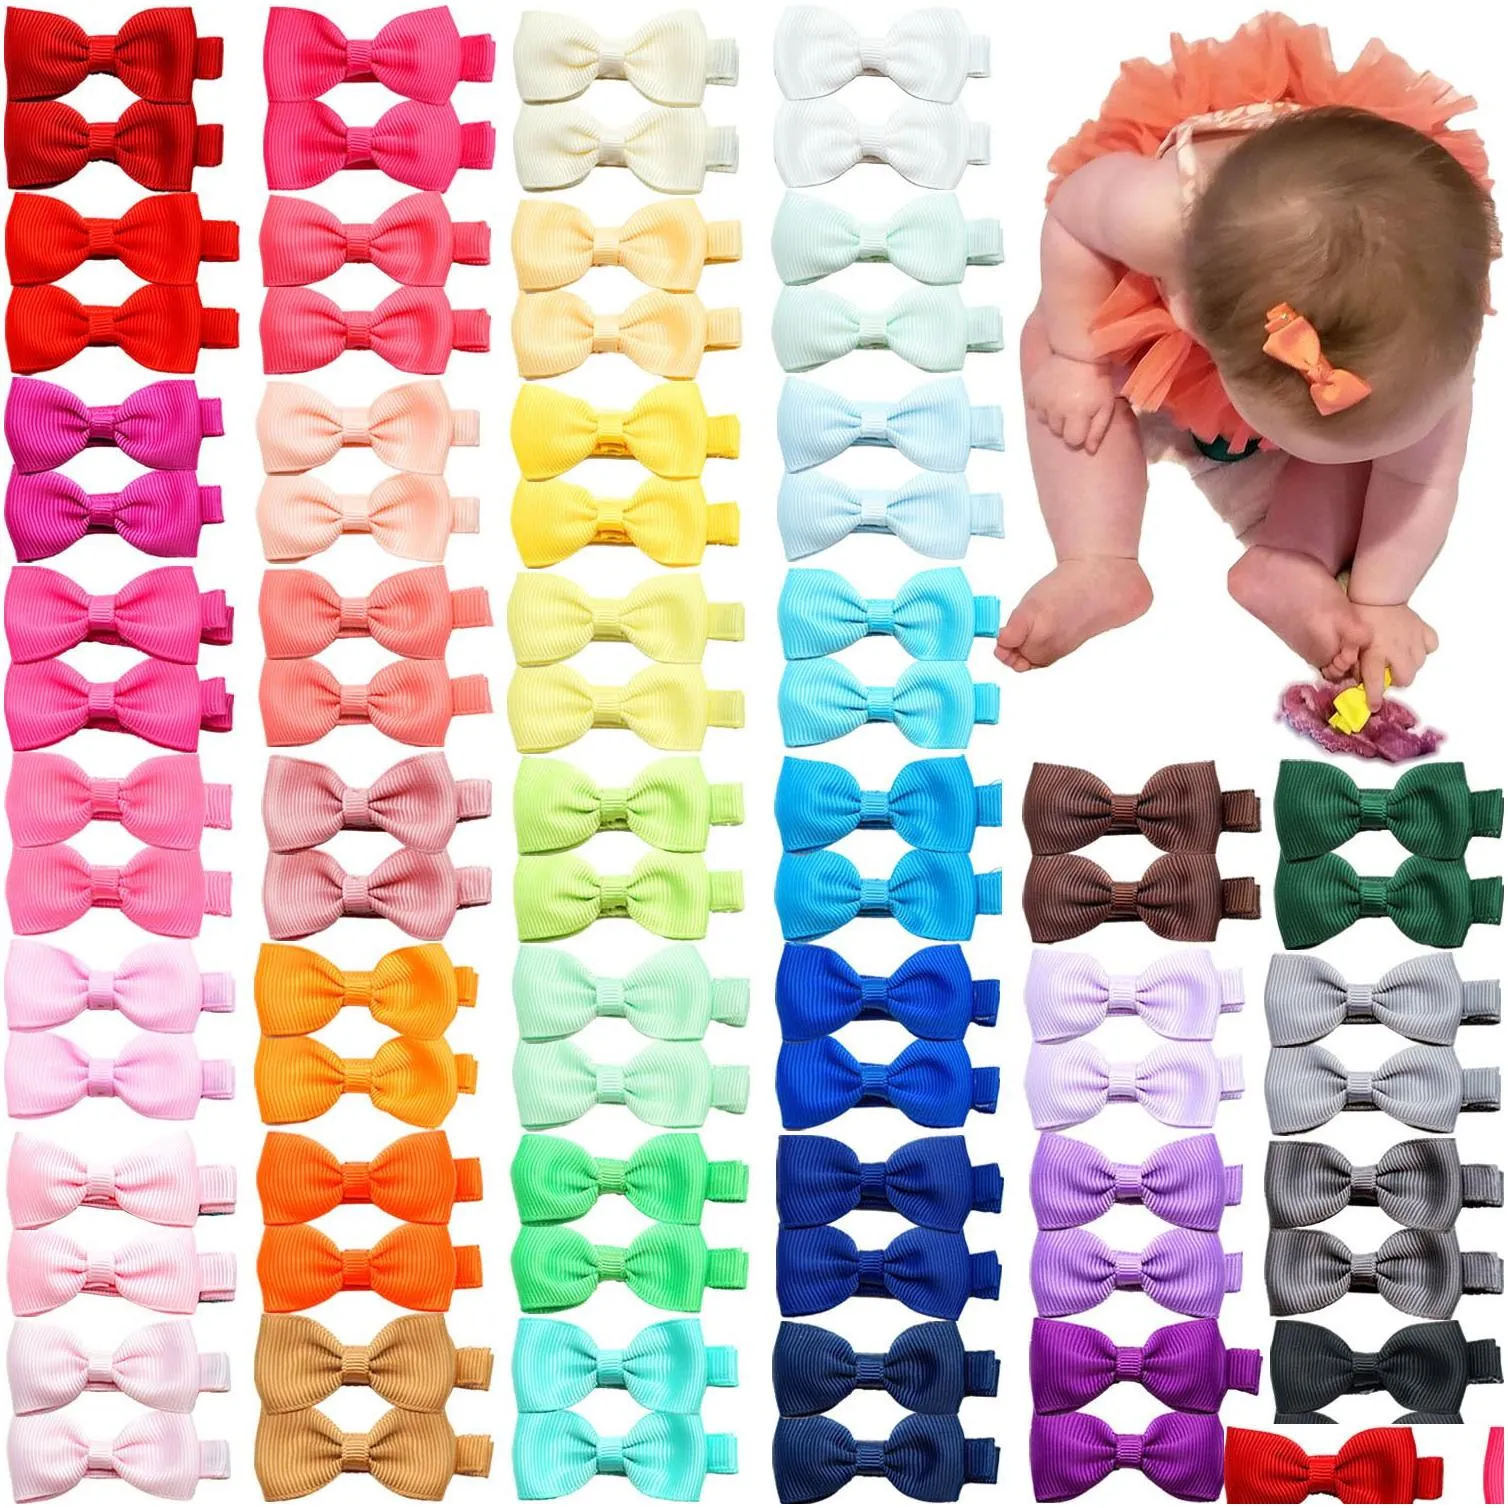 80 pieces baby hair clips 2 inches hair bows fully wrapped alligator clips for infant and baby girls 40 colors in pairs4280725